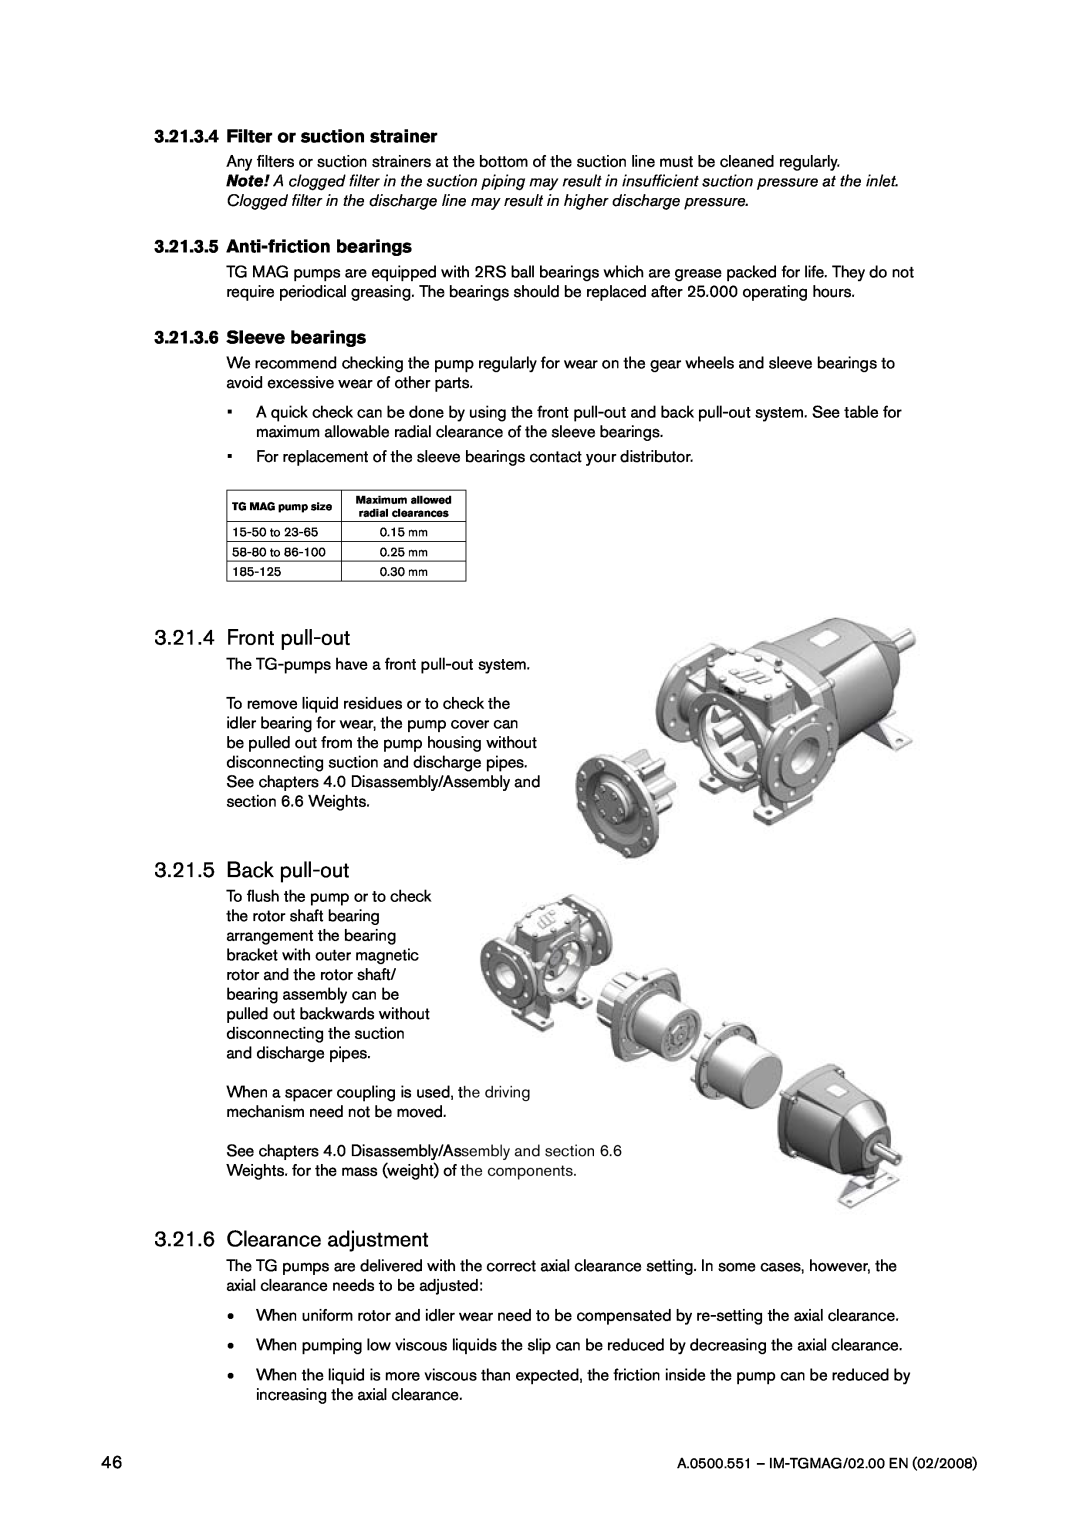 SPX Cooling Technologies TG MAG15-50 Front pull-out, Back pull-out, Clearance adjustment, 3.21.3.5Anti-frictionbearings 